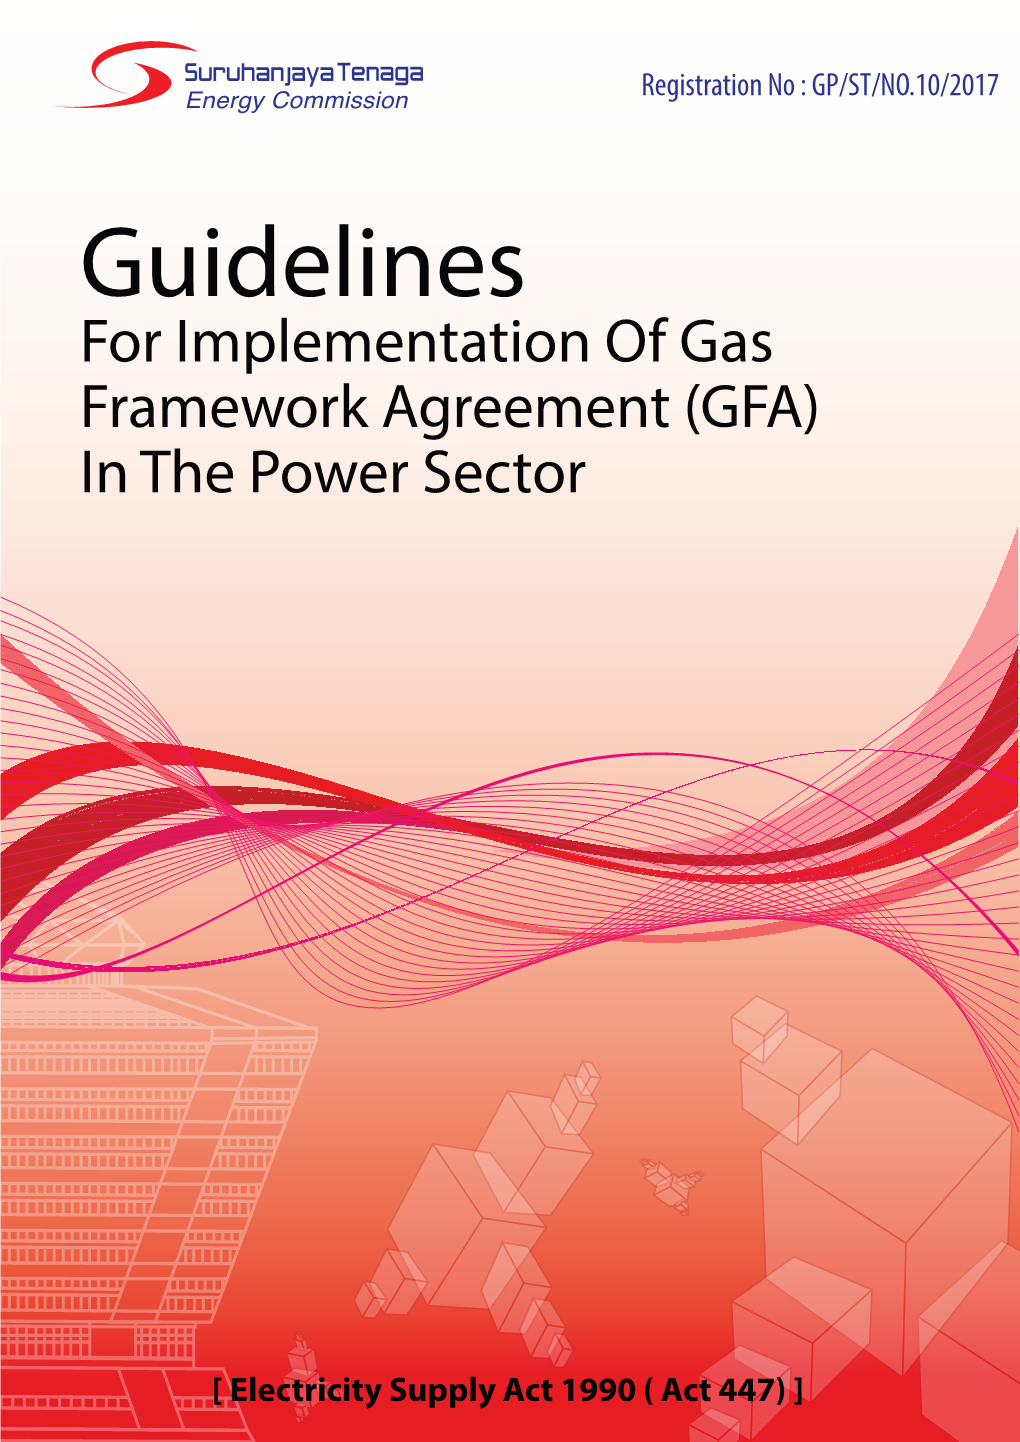 Guidelines for Implementation of Gas Framework Agreement (GFA) in the Power Sector